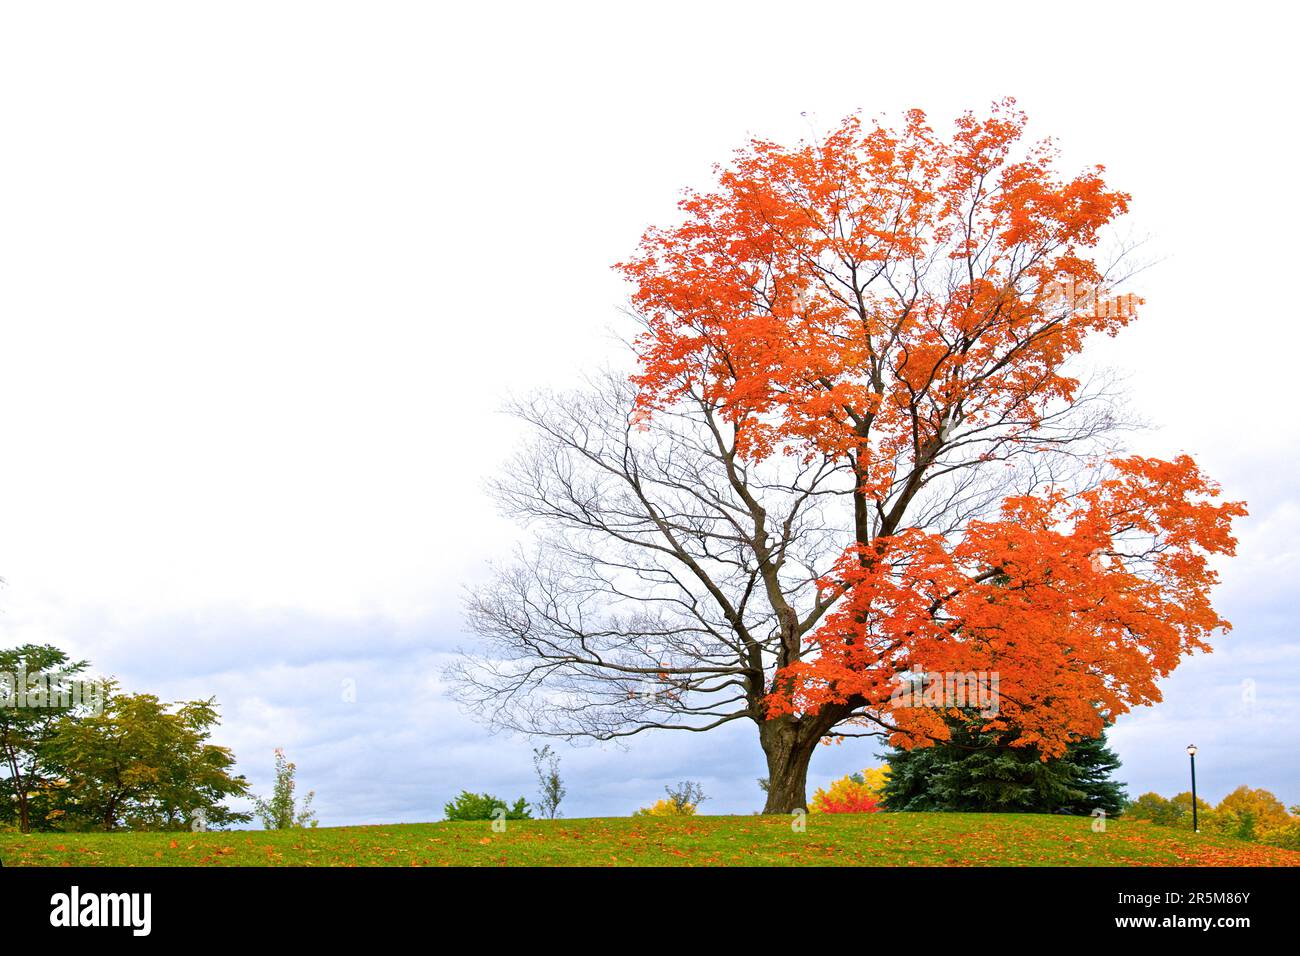 The single maple tree on the hill, perfect as wallpaper Stock Photo